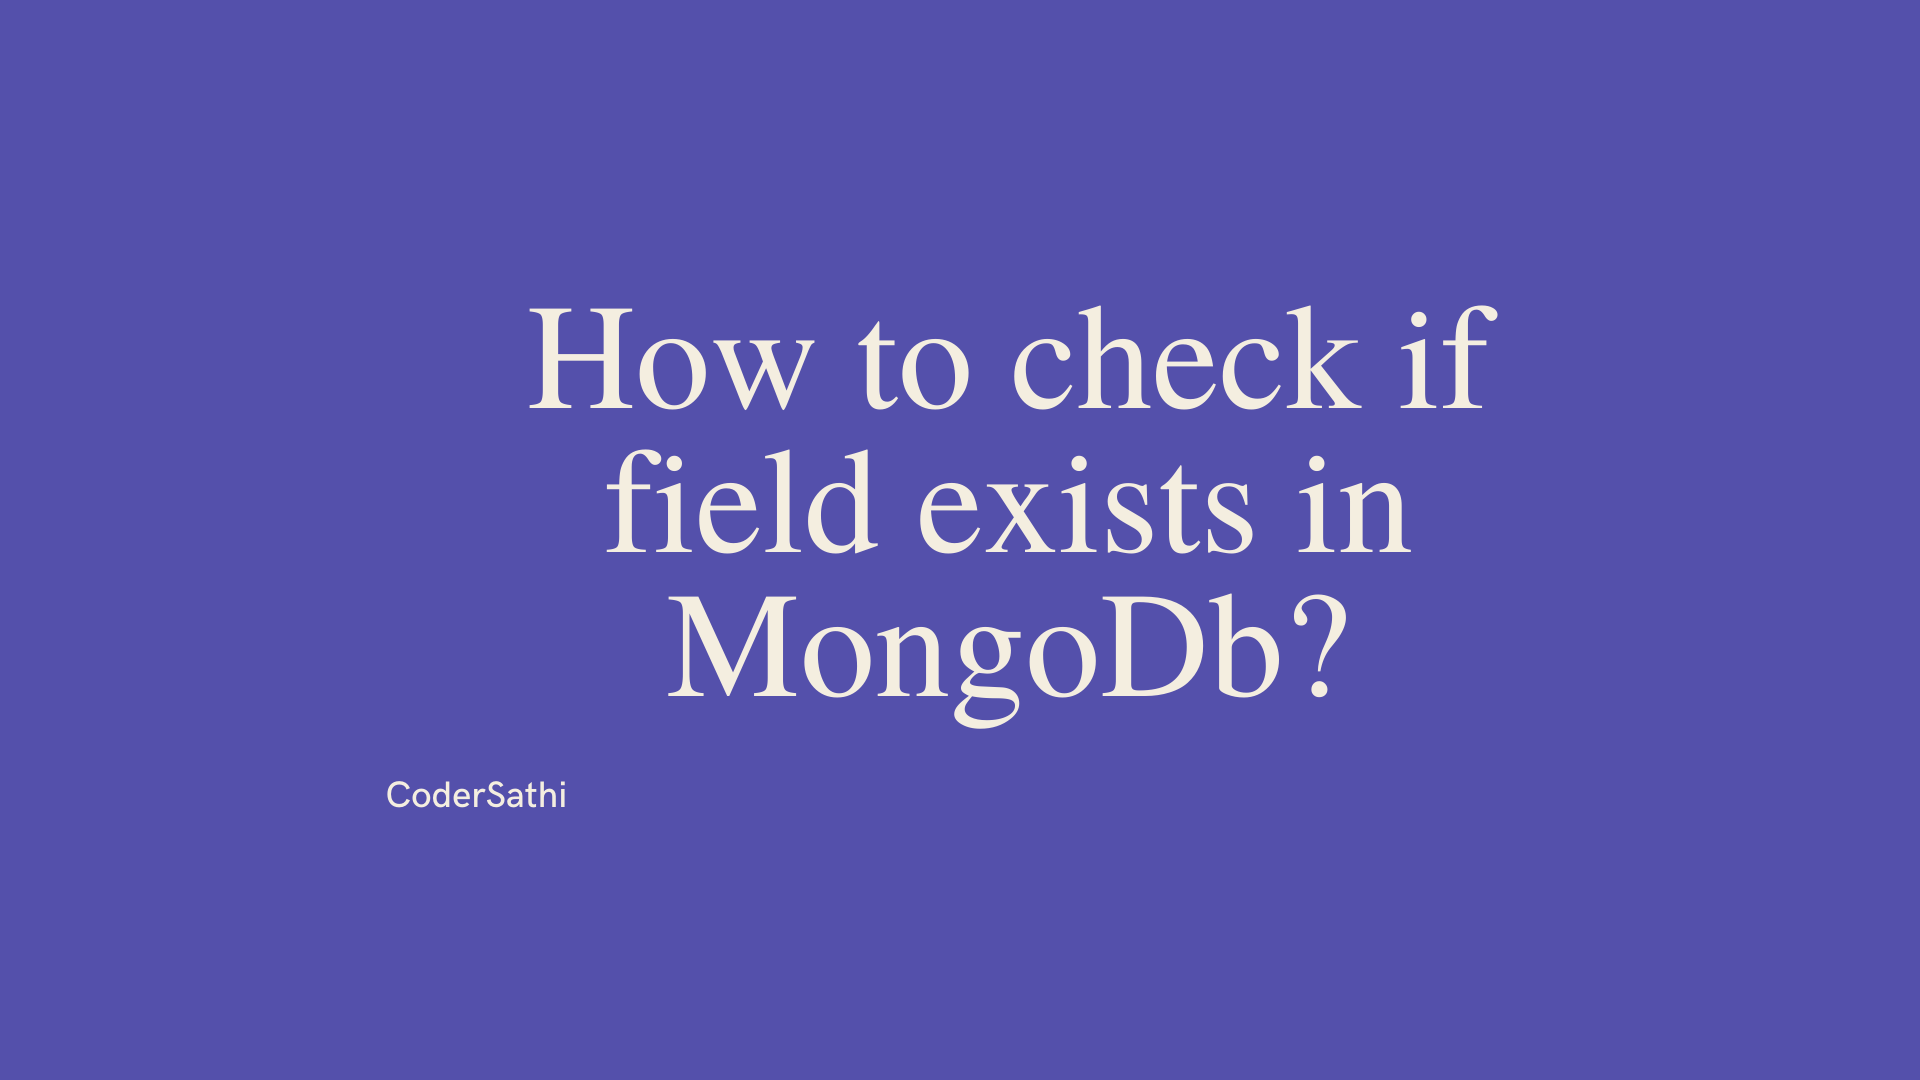 How to check if field exists in MongoDb?